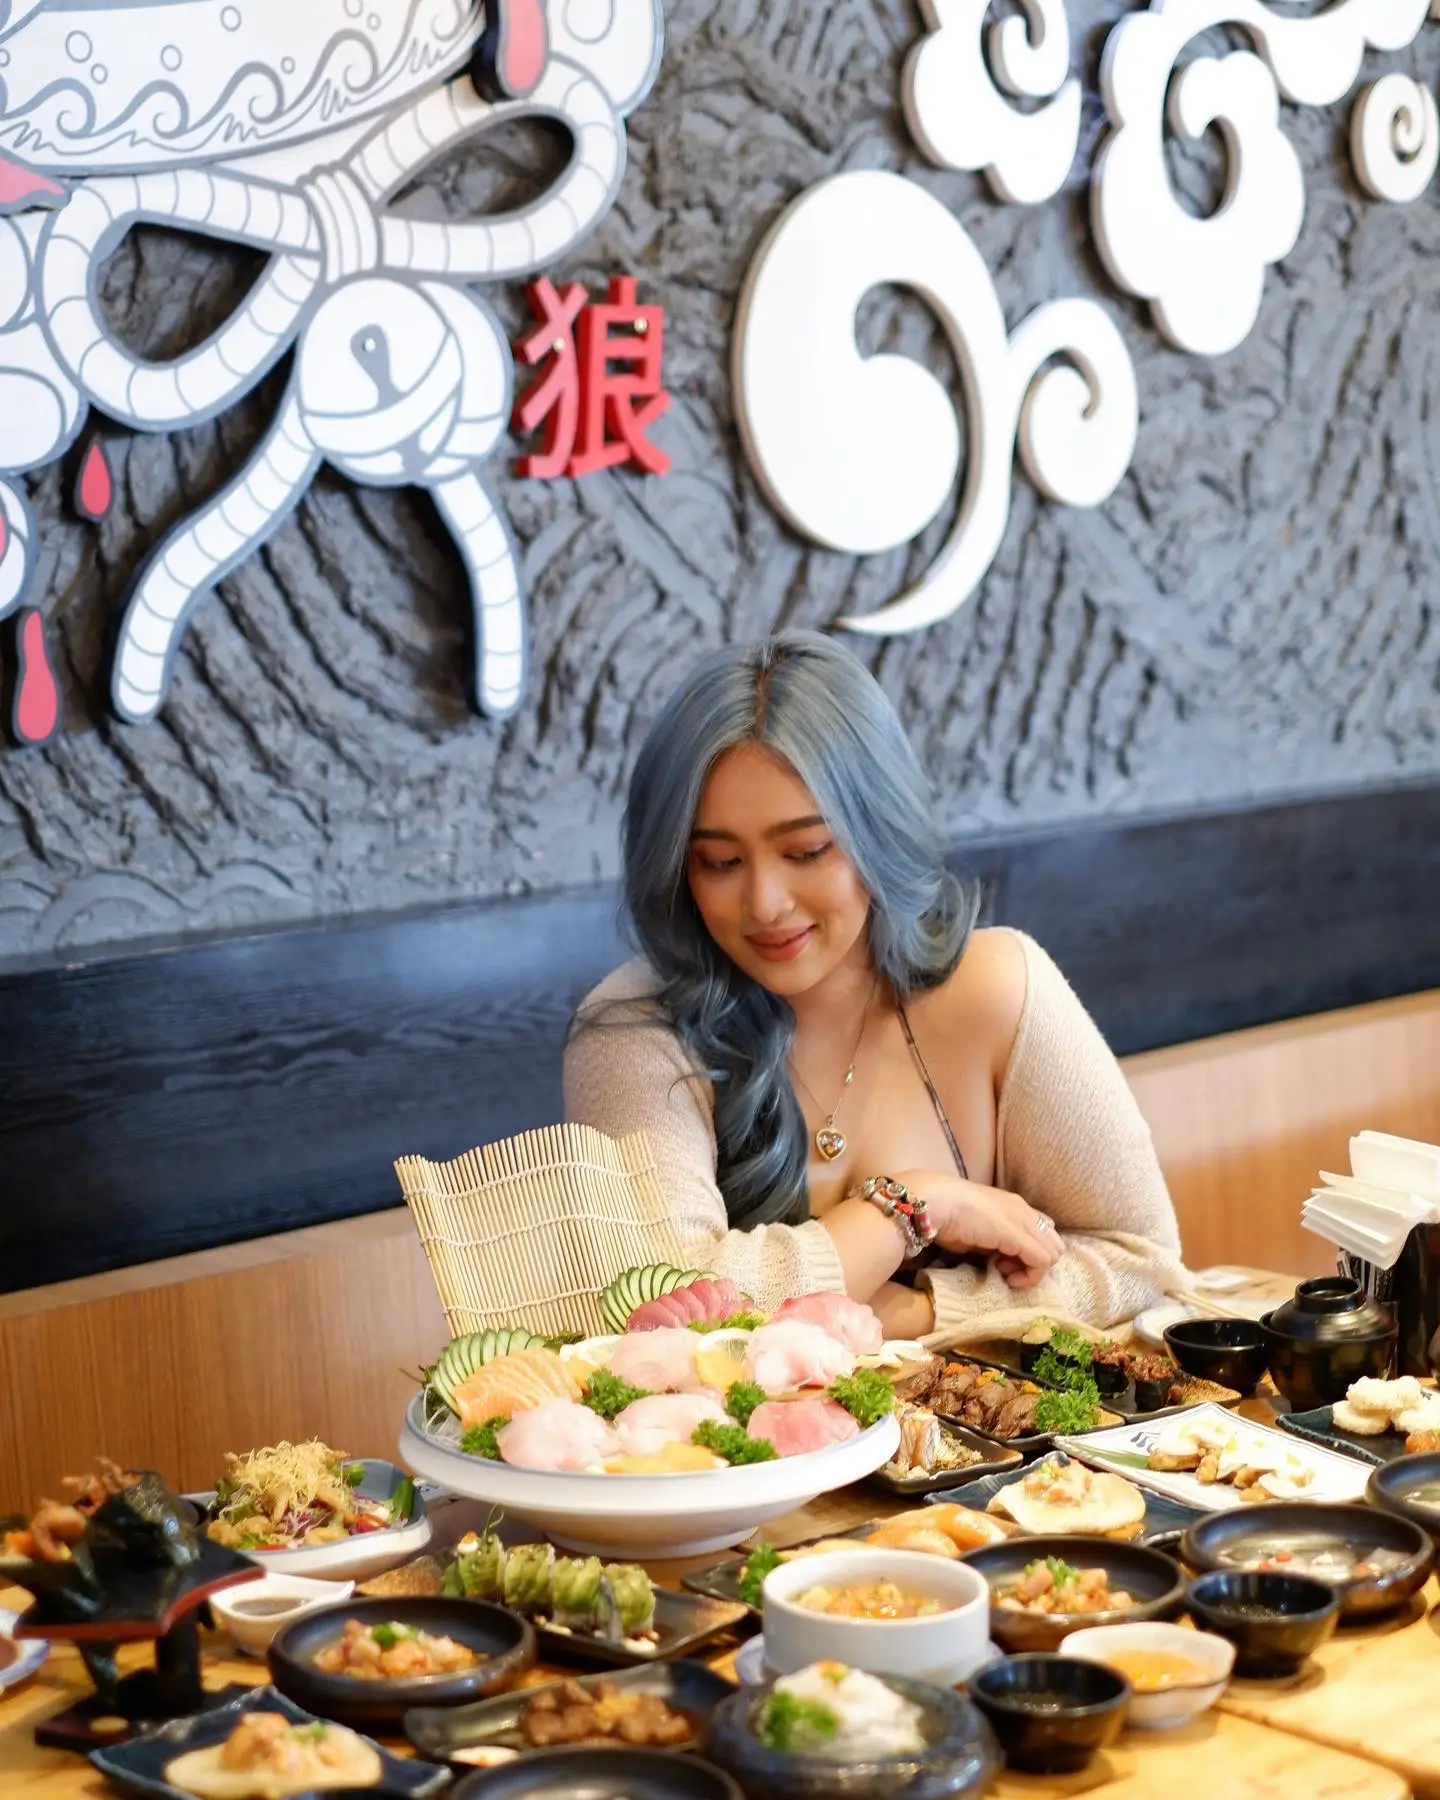 Okami Sushi Premium The Best Of Japanese Food Buffet🍱, Video published by  แพ้ของอร่อย